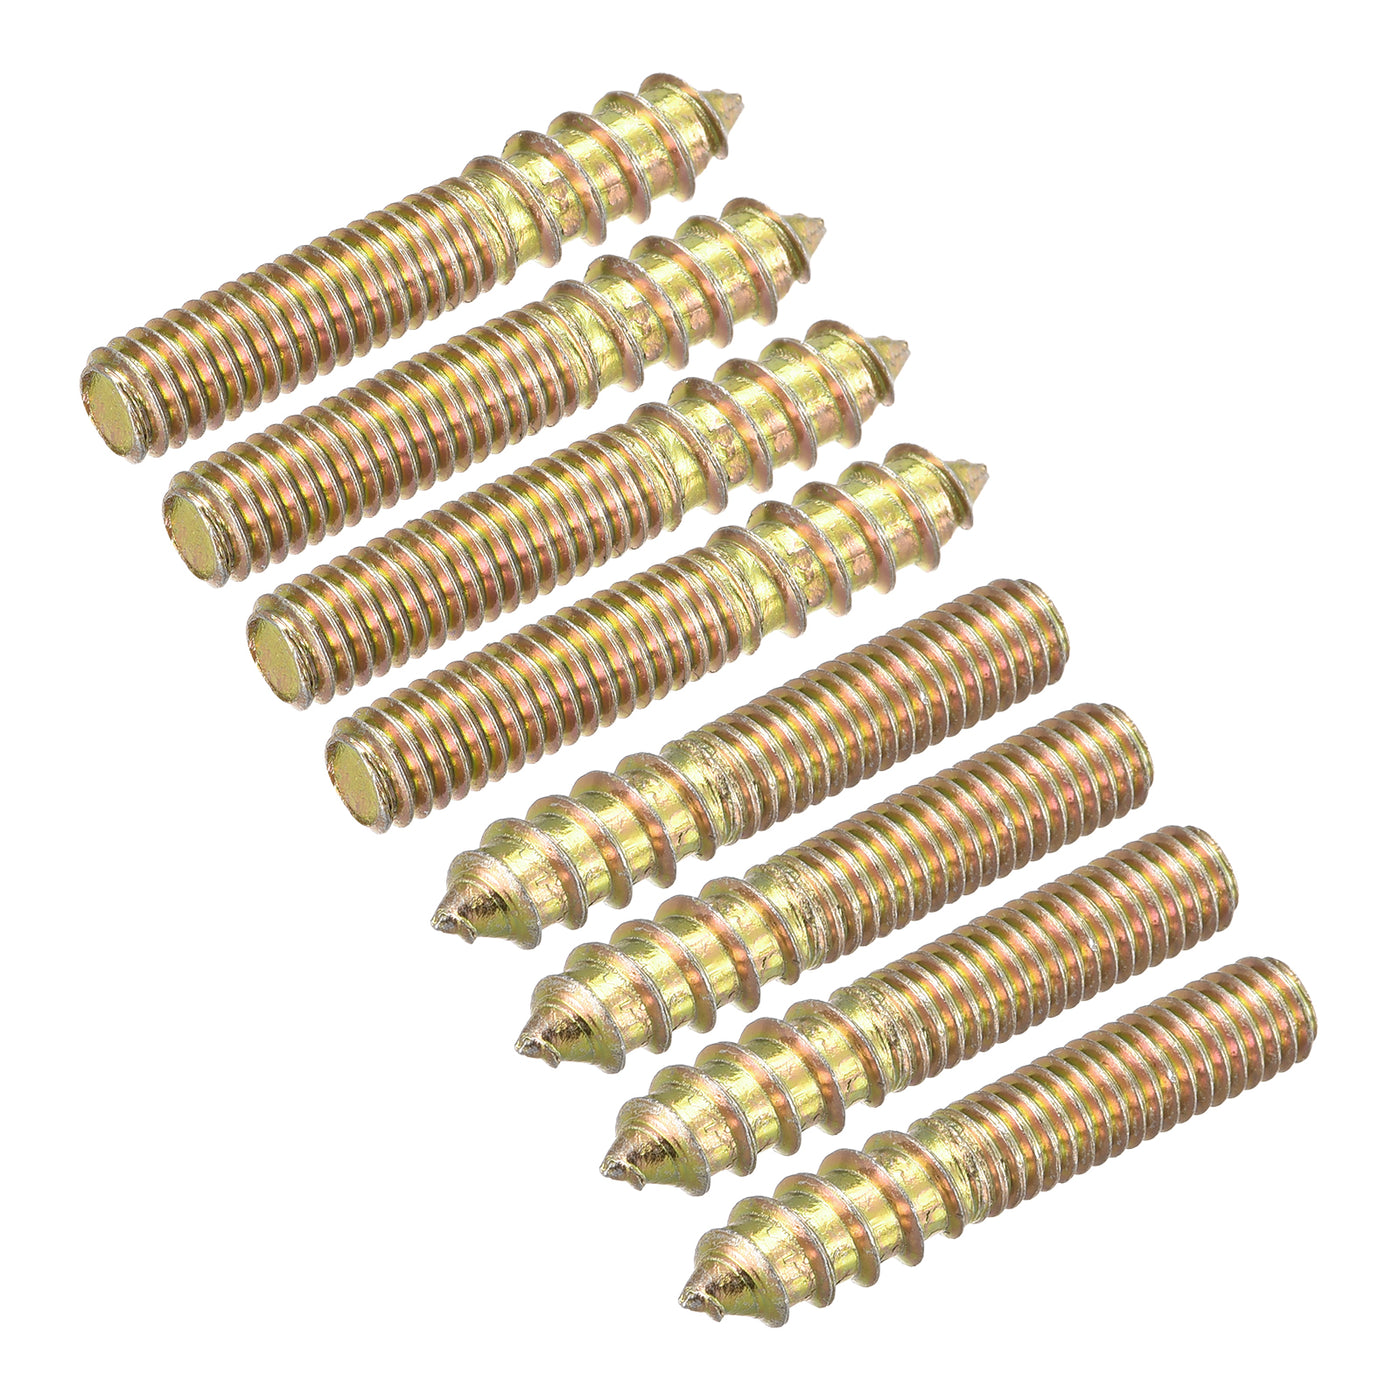 Uxcell Uxcell M10x60mm Hanger Bolts, 8pcs Double Ended Thread Dowel Screws for Wood Furniture